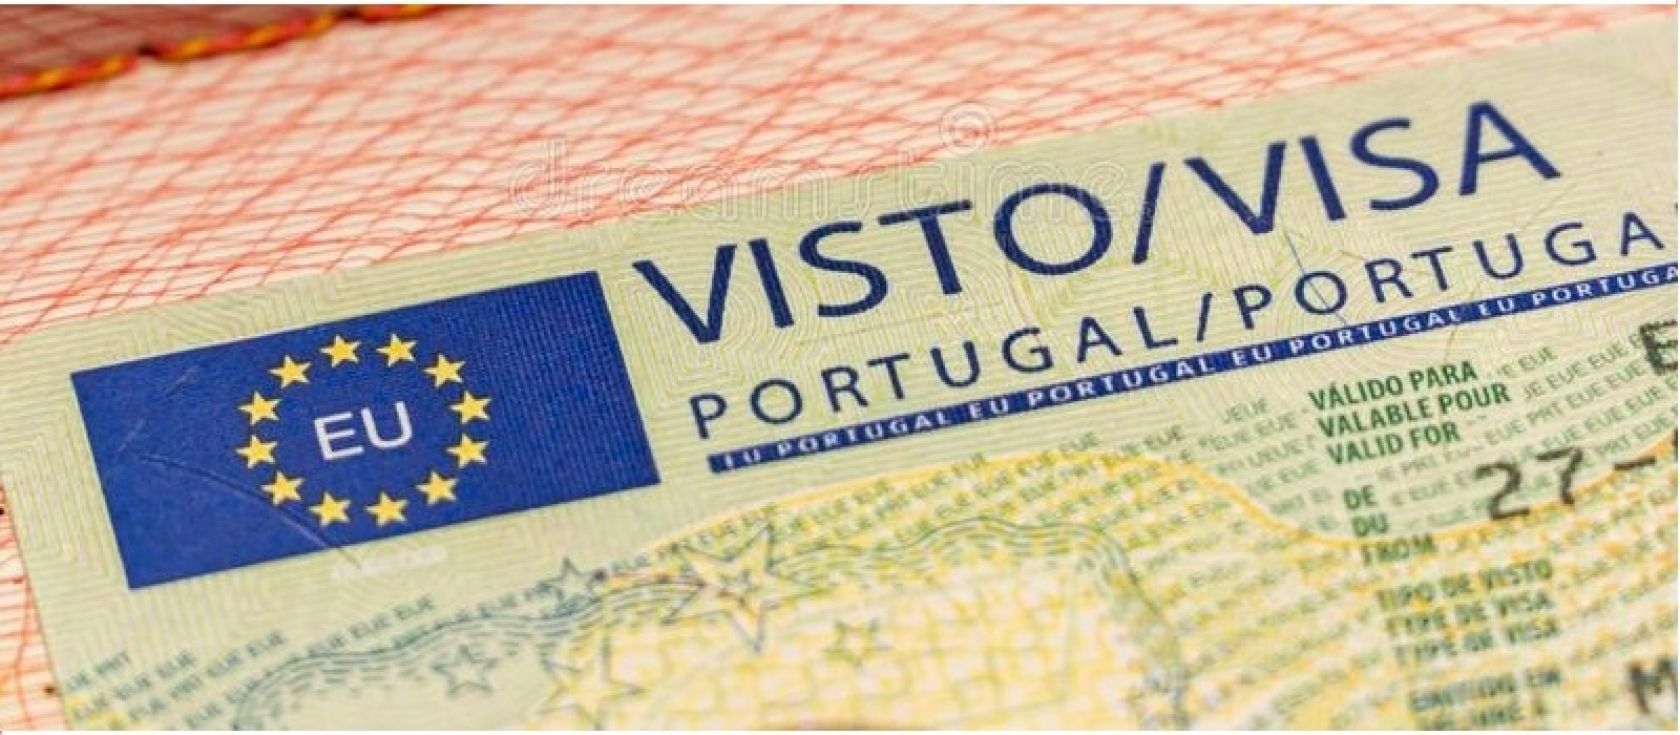 Current and Available VISA OPTIONS in Portugal for Non-Europeans